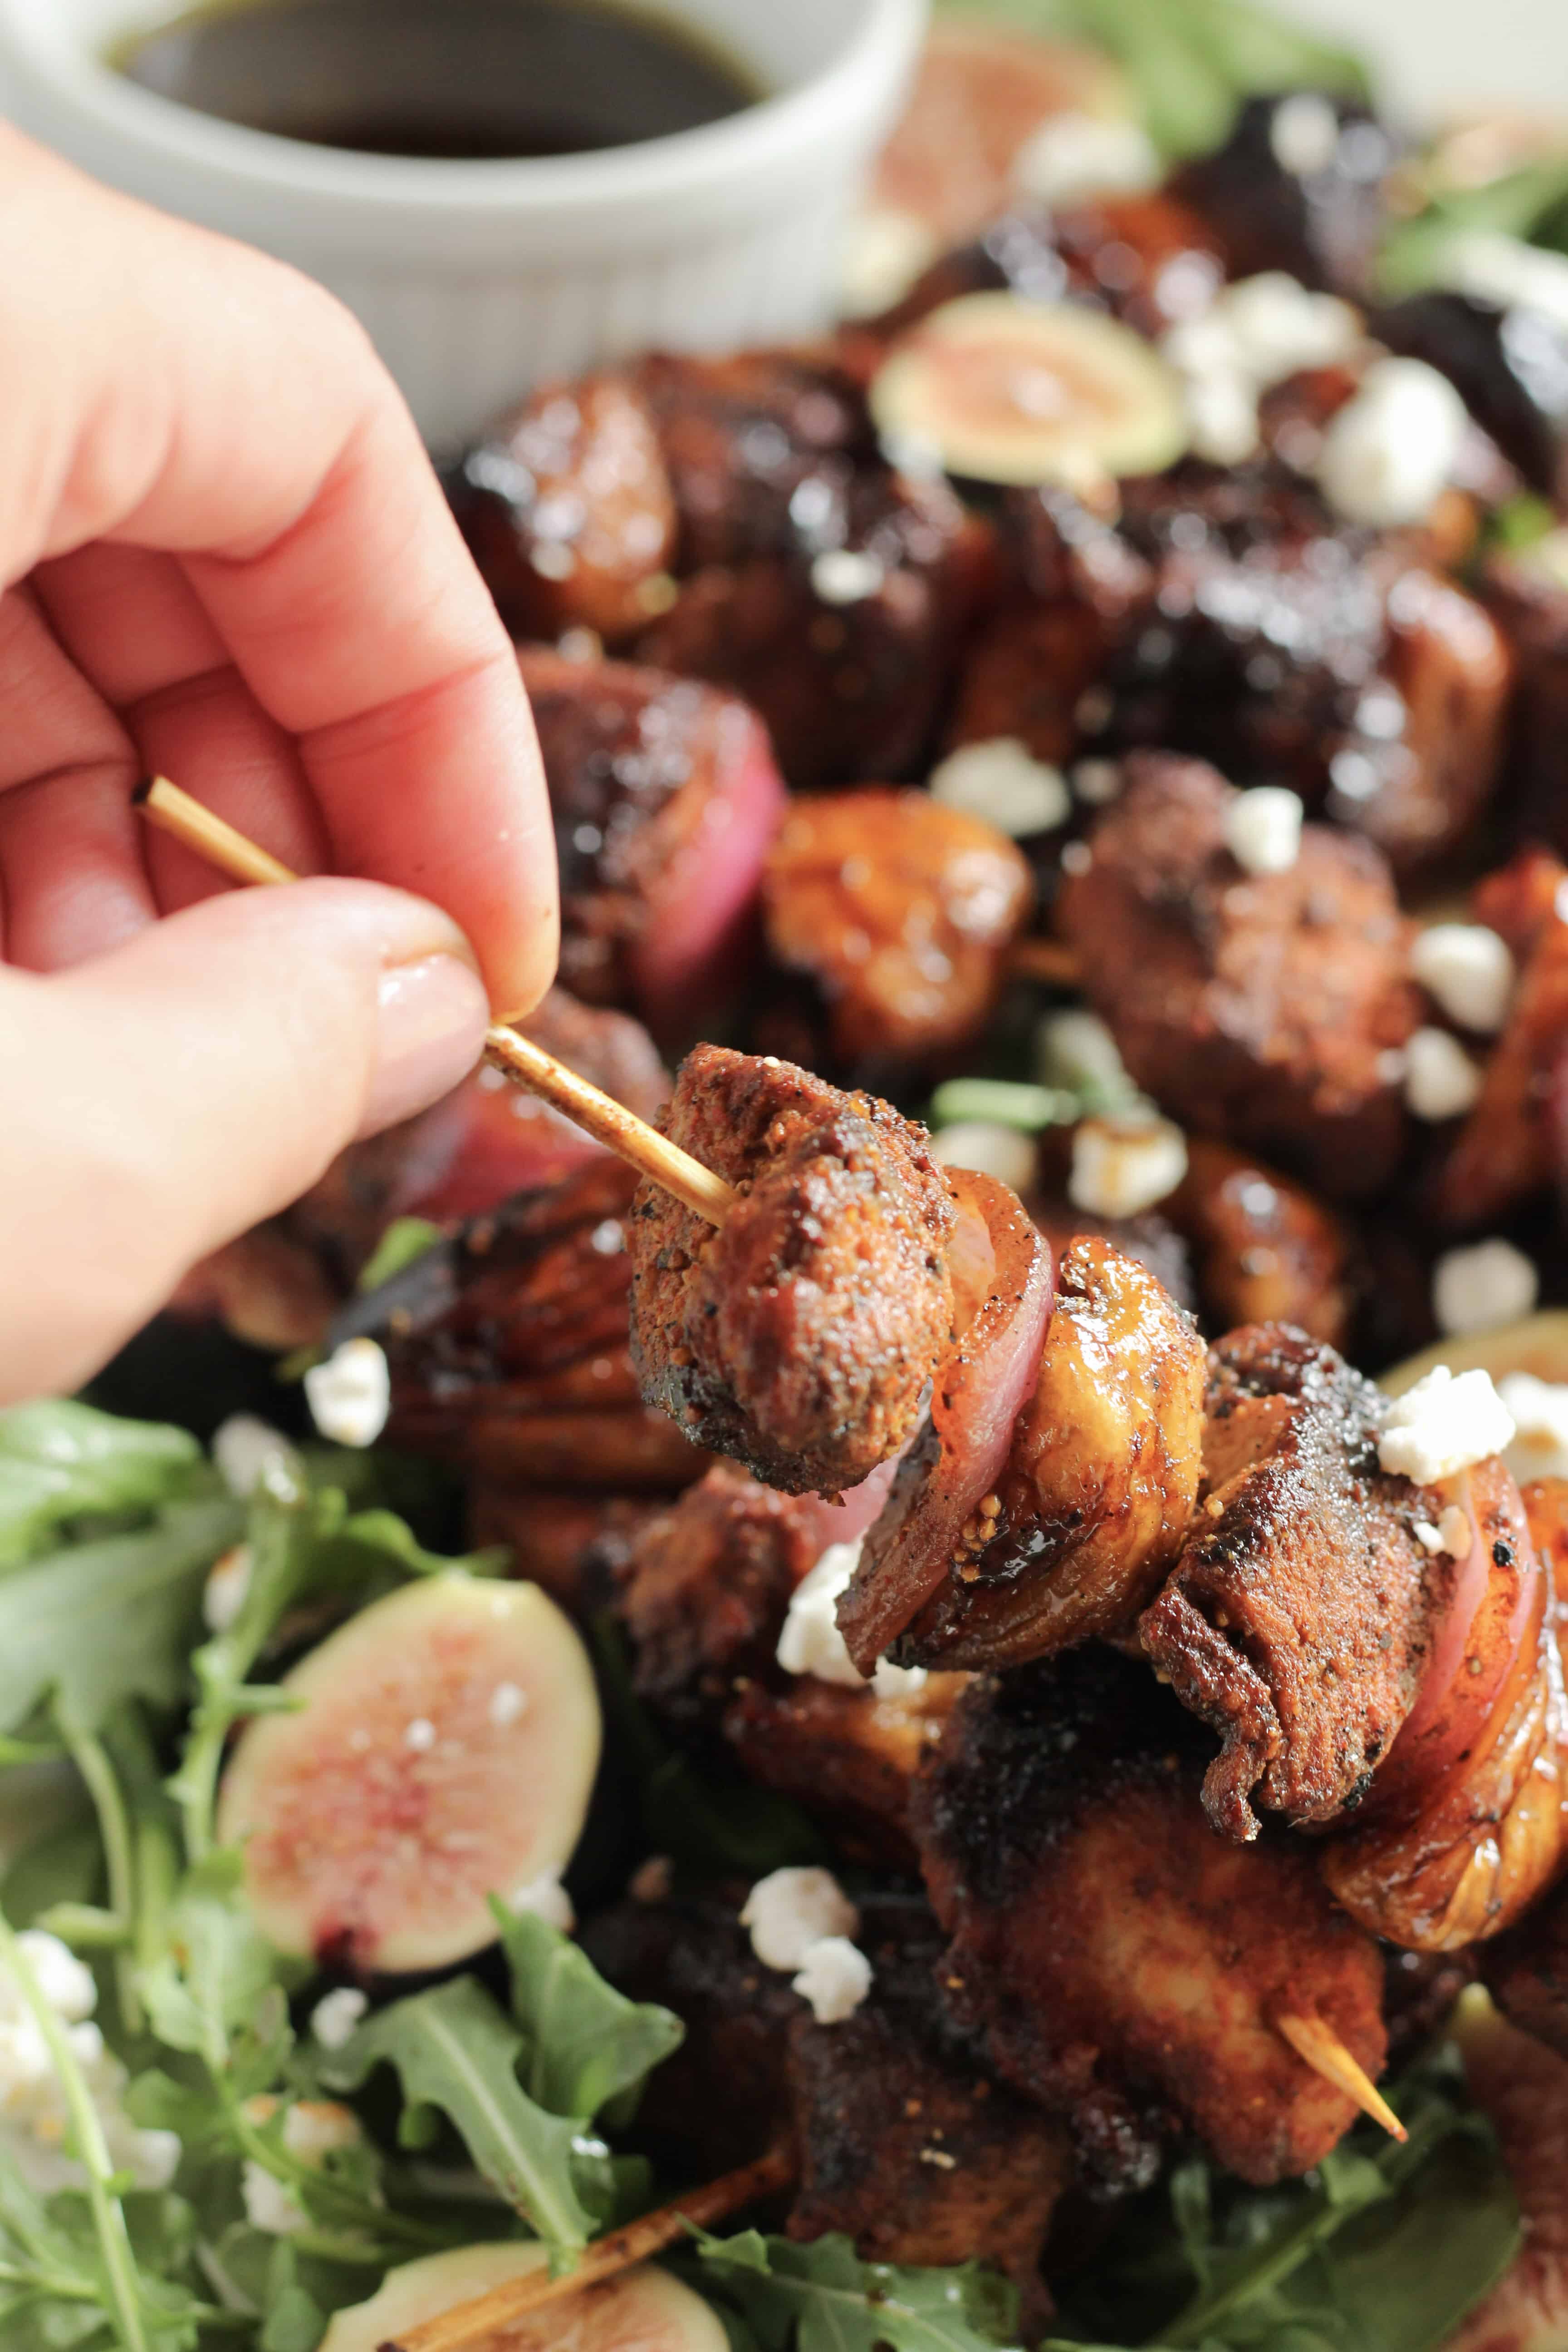 Glazed pork kebabs are a treat on the grill and surprisingly simple to make! Enjoy these Glazed Pork Tenderloin Kebabs with Figs this summer